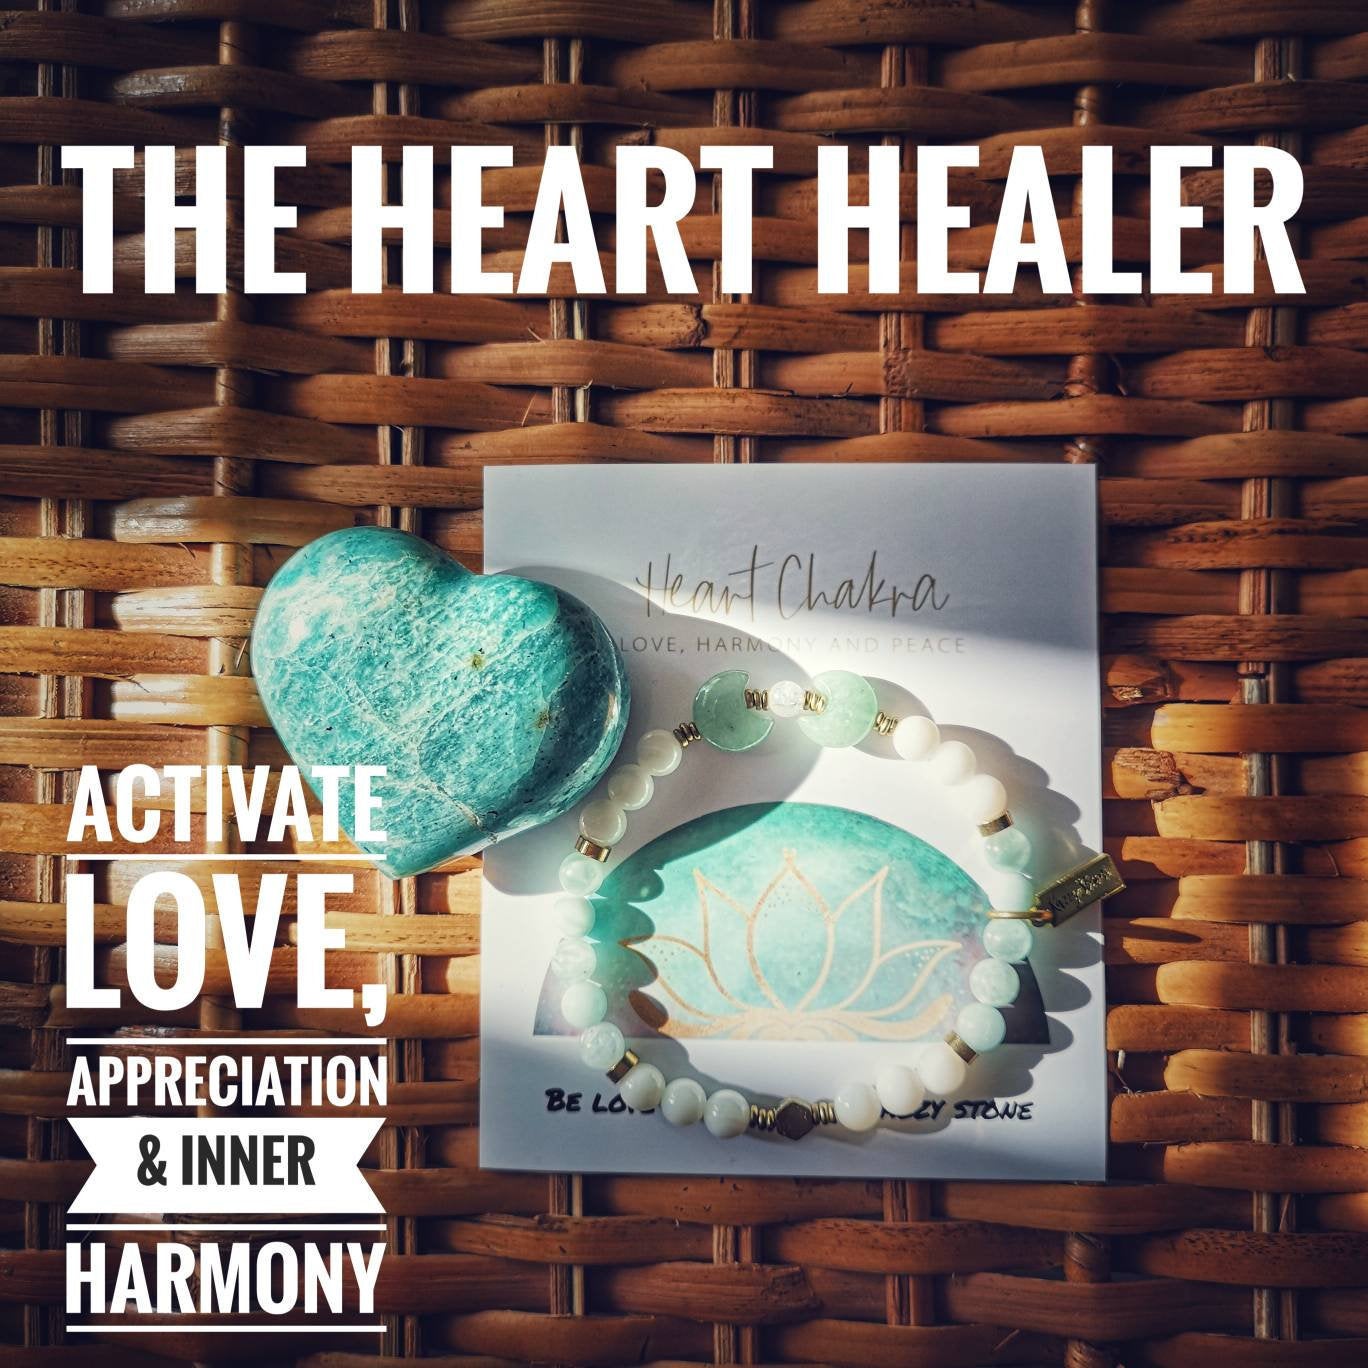 The Heart Healer: Activator of love, appreciation, and inner harmony.